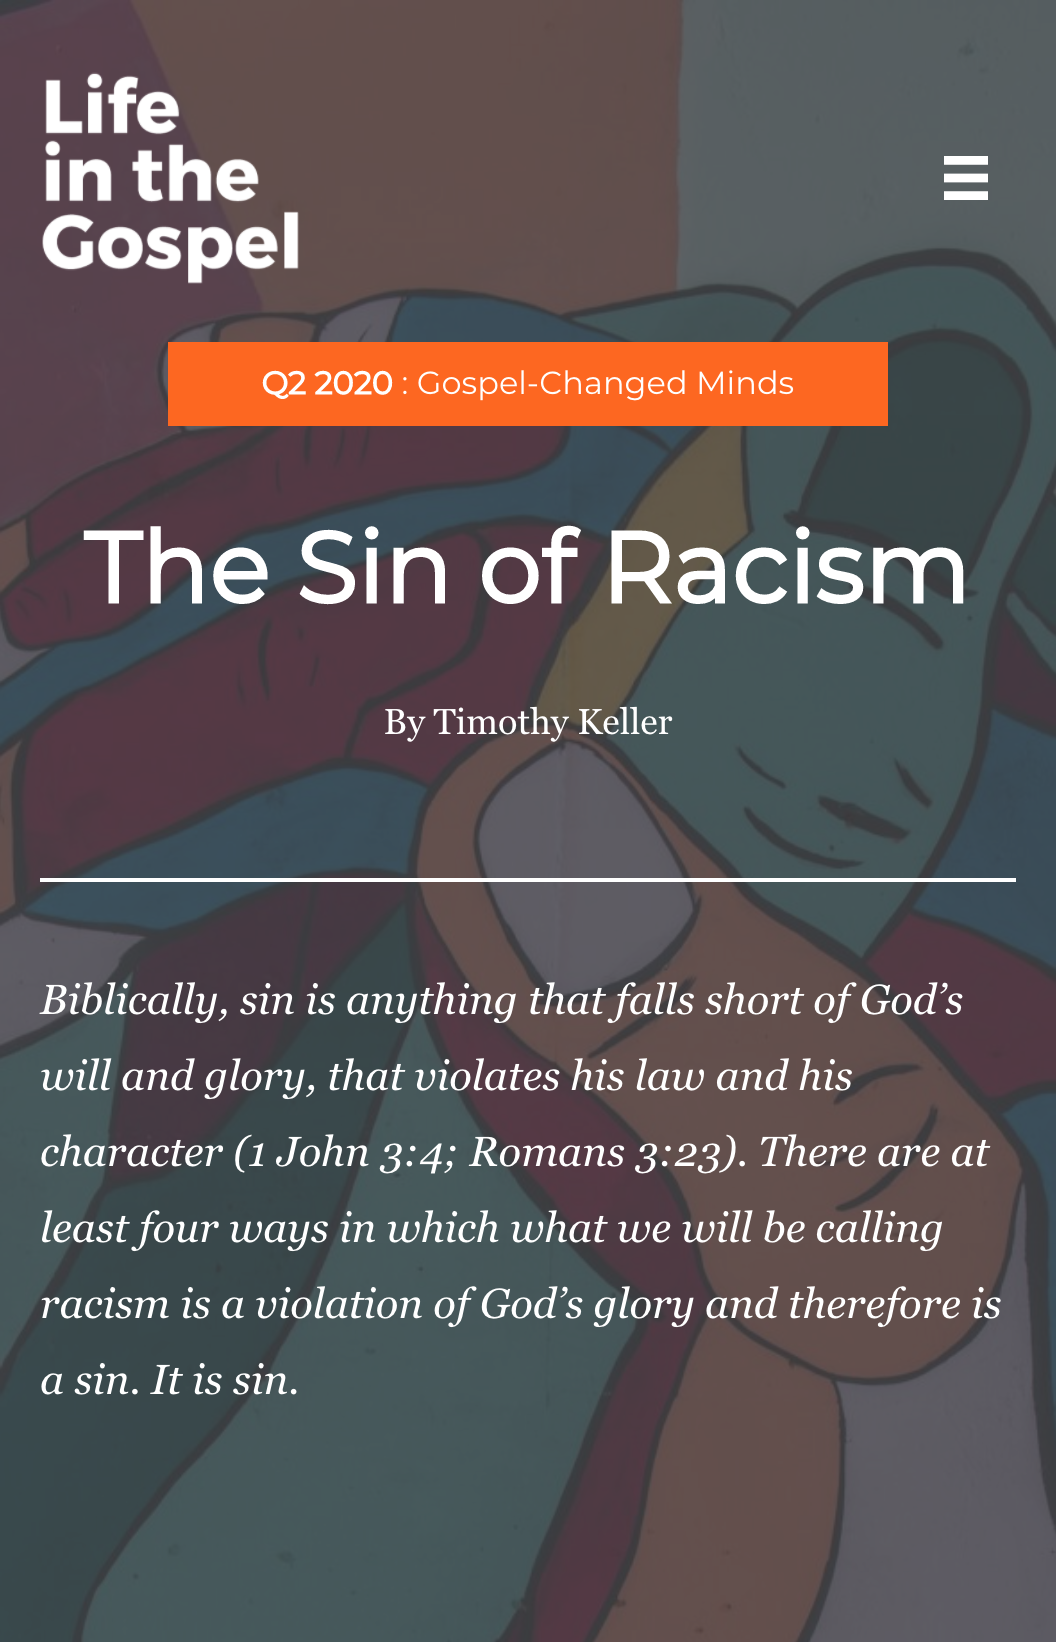 The Sin of Racism